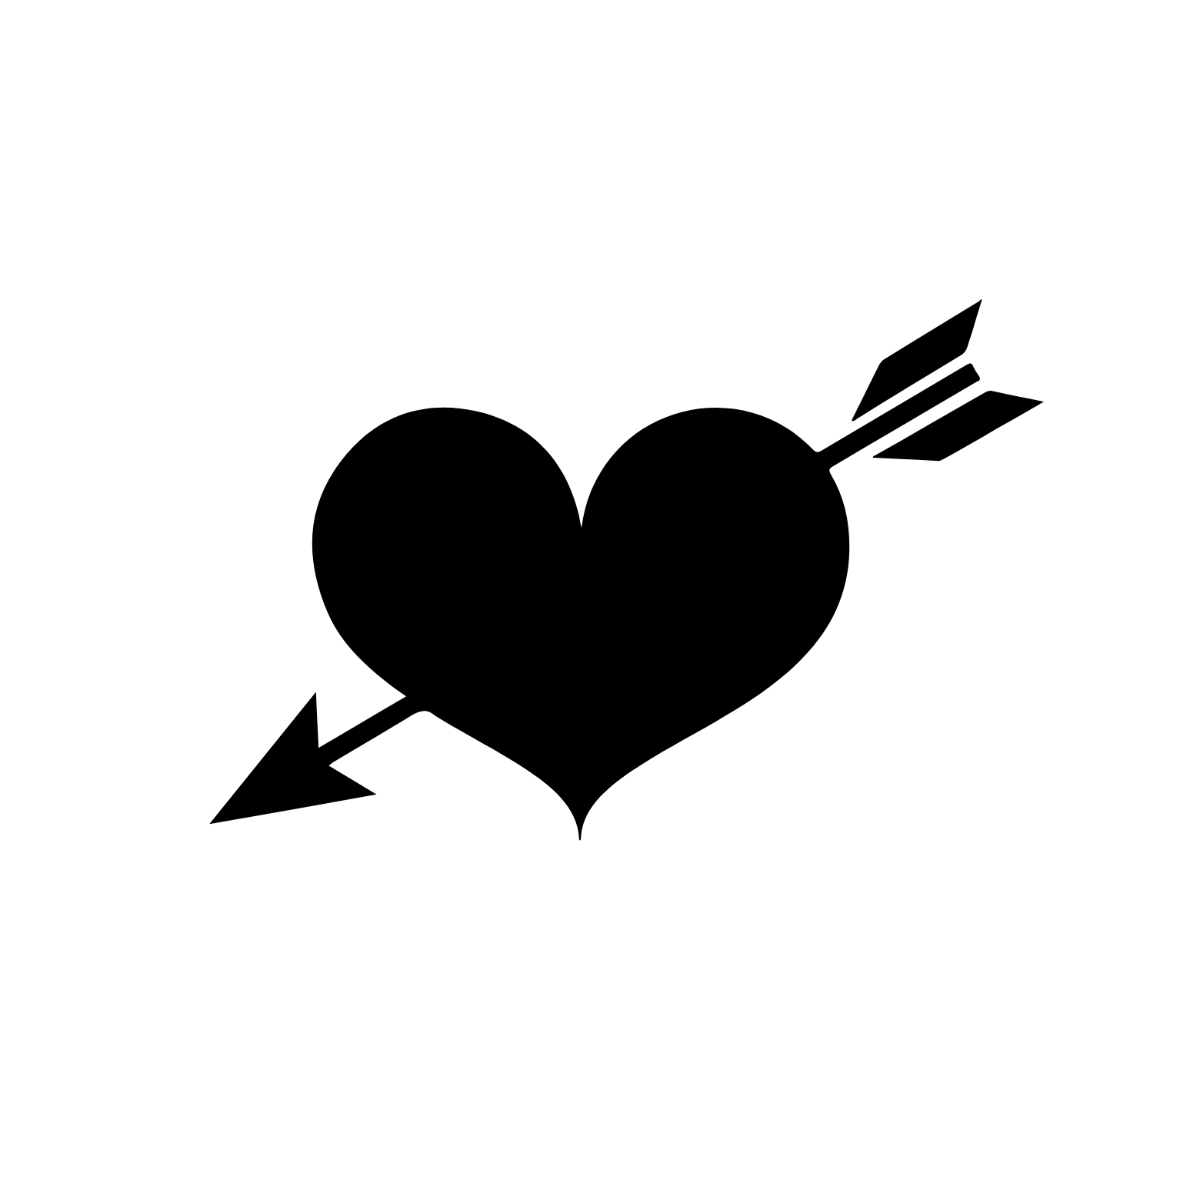 Black Heart with Arrow Silhouette